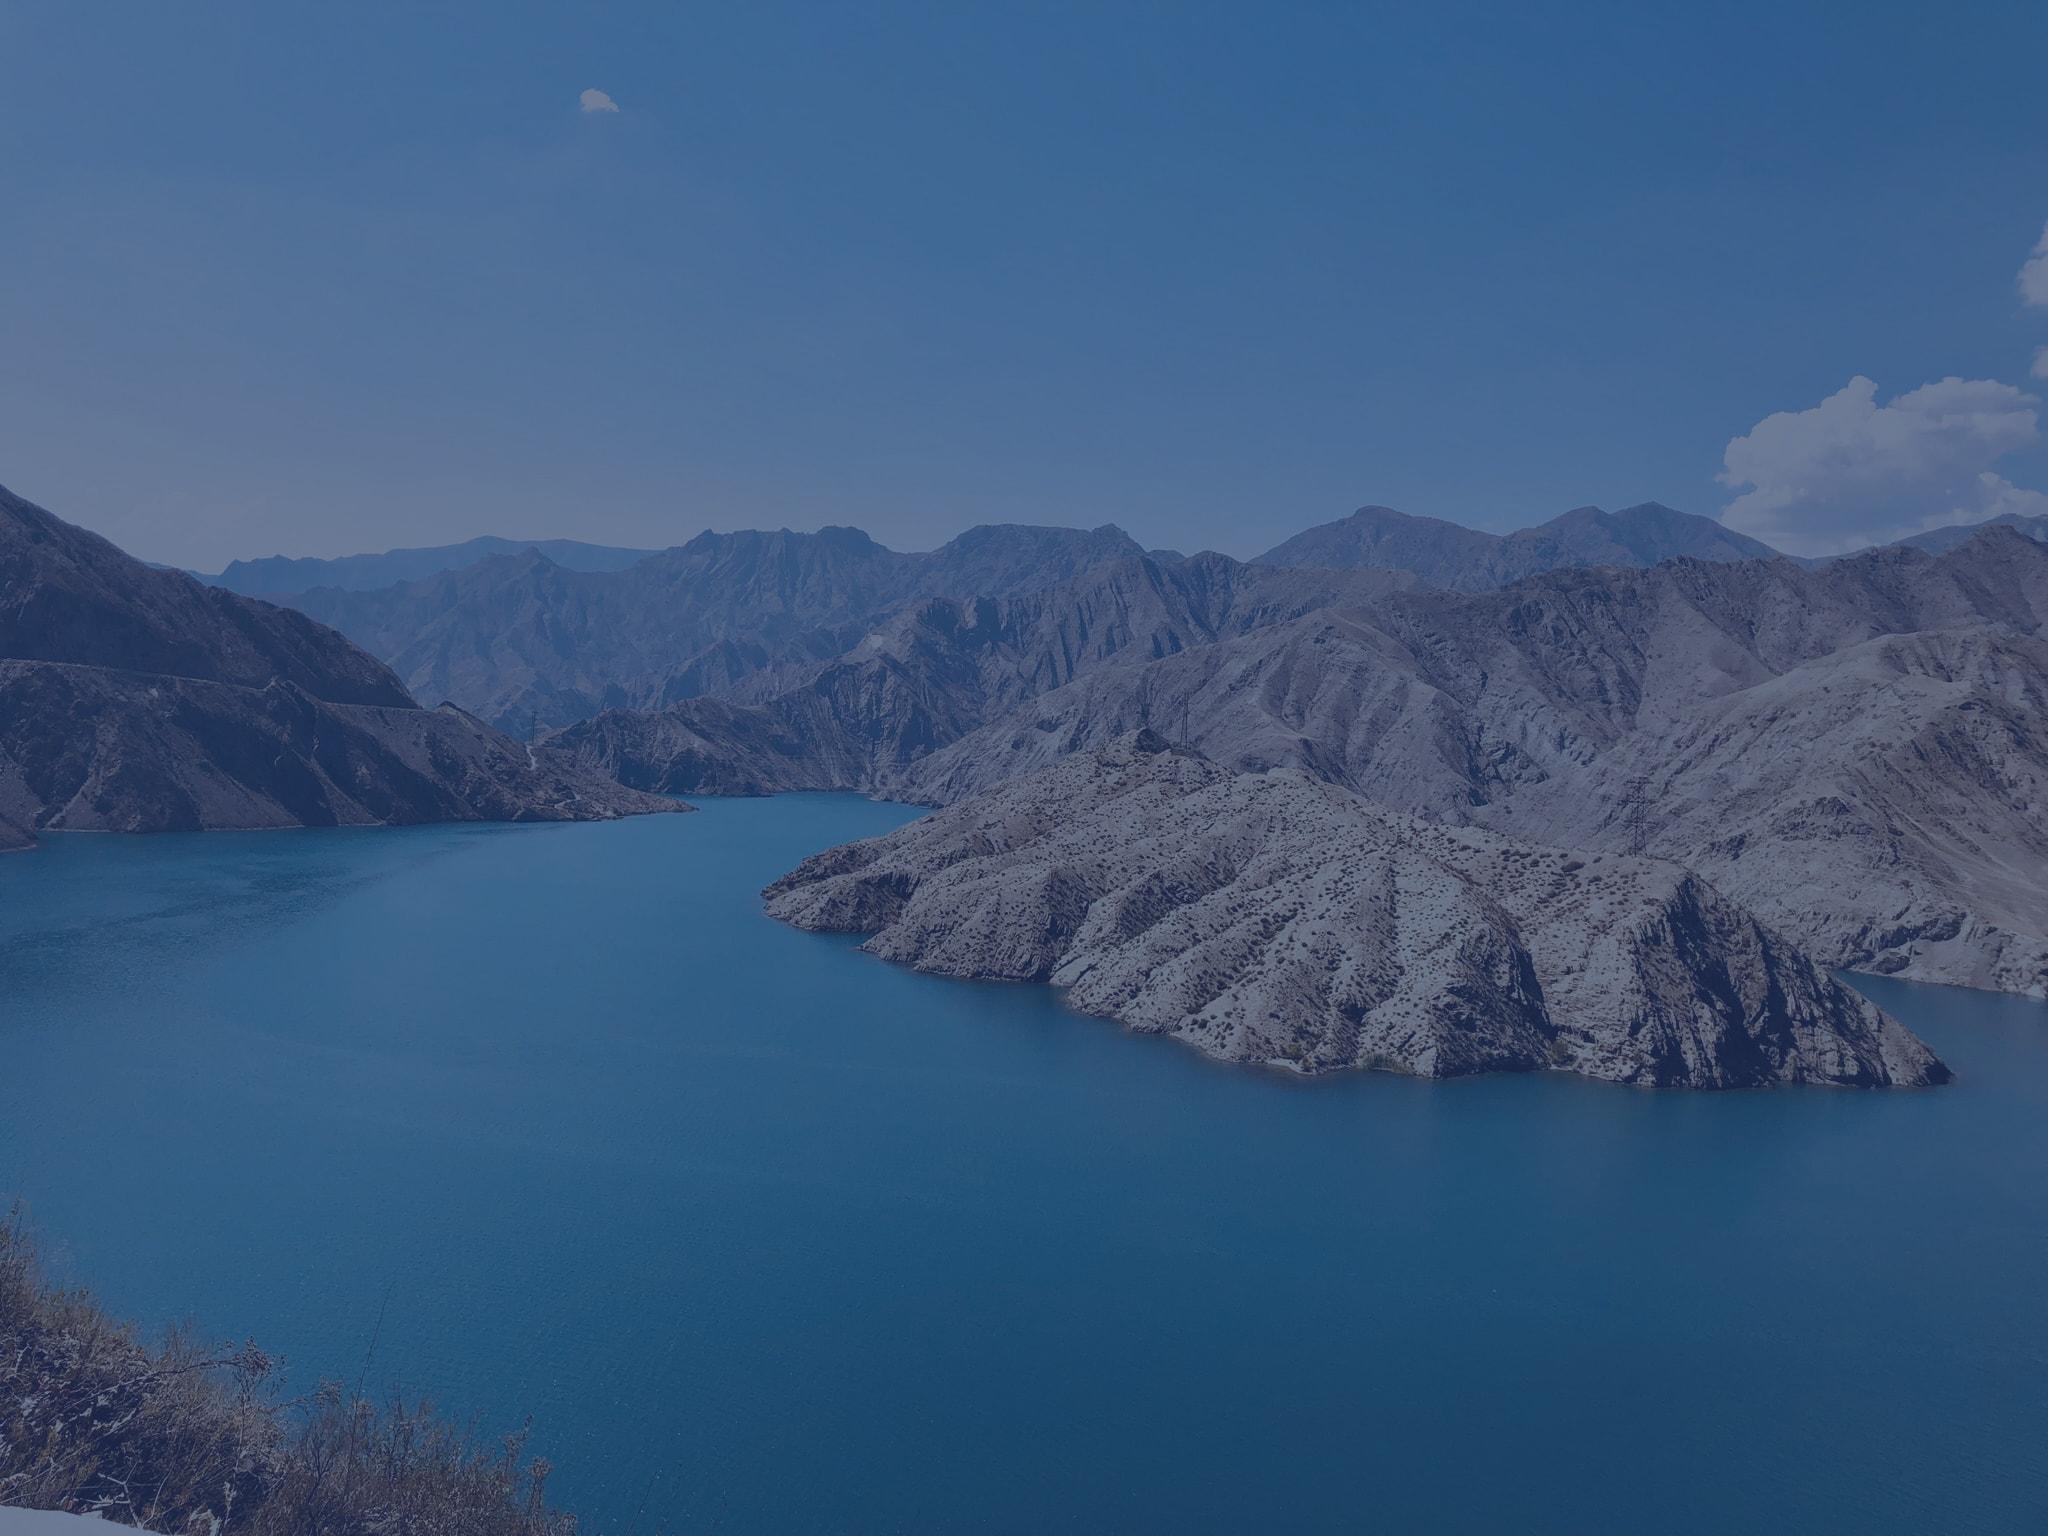 PRESS RELEASE: Caspian Policy Center Releases Report and Holds Discussion on Water Management in Central Asia